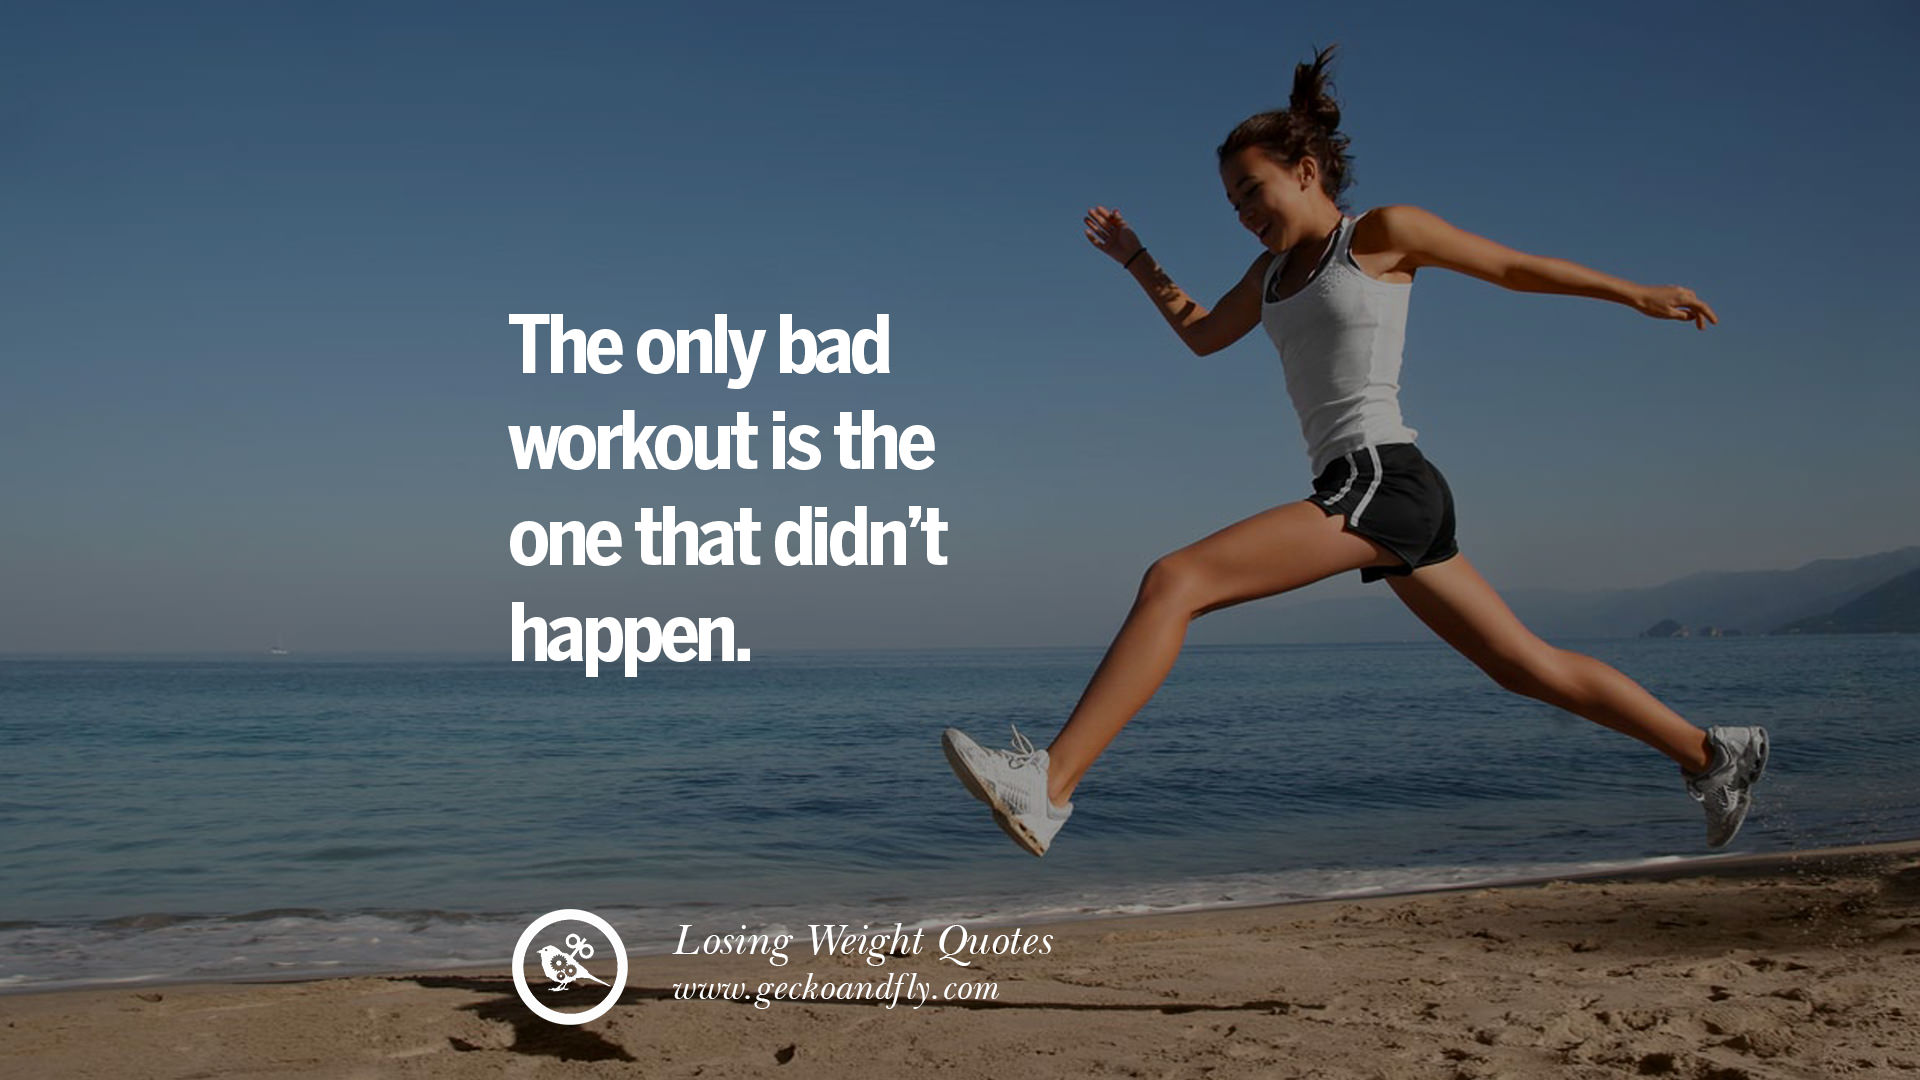 Motivational Quotes For Working Out And Losing Weight